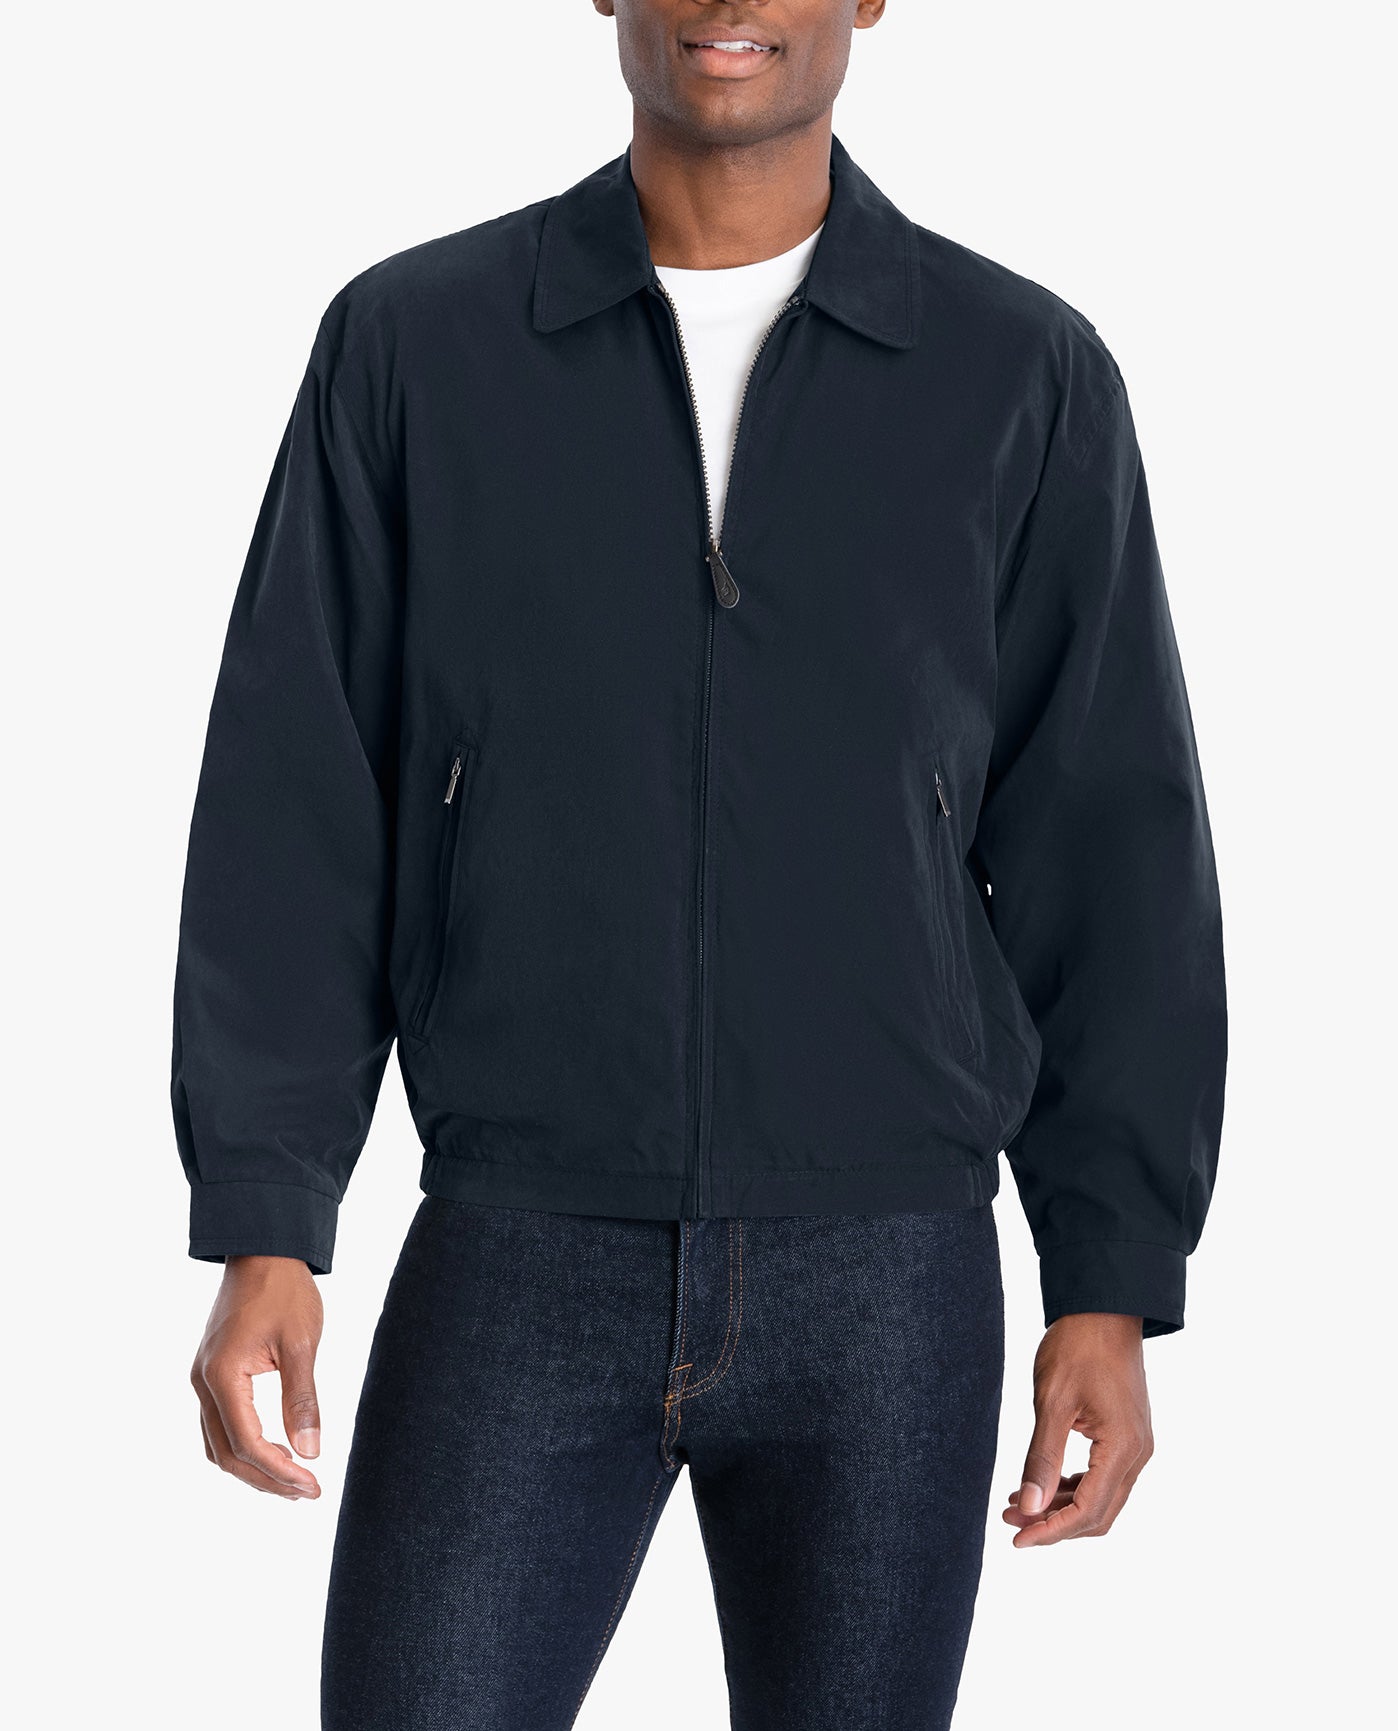 FRONT VIEW OF TALL LIGHT WEIGHT ZIP FRONT GOLF JACKET | NAVY